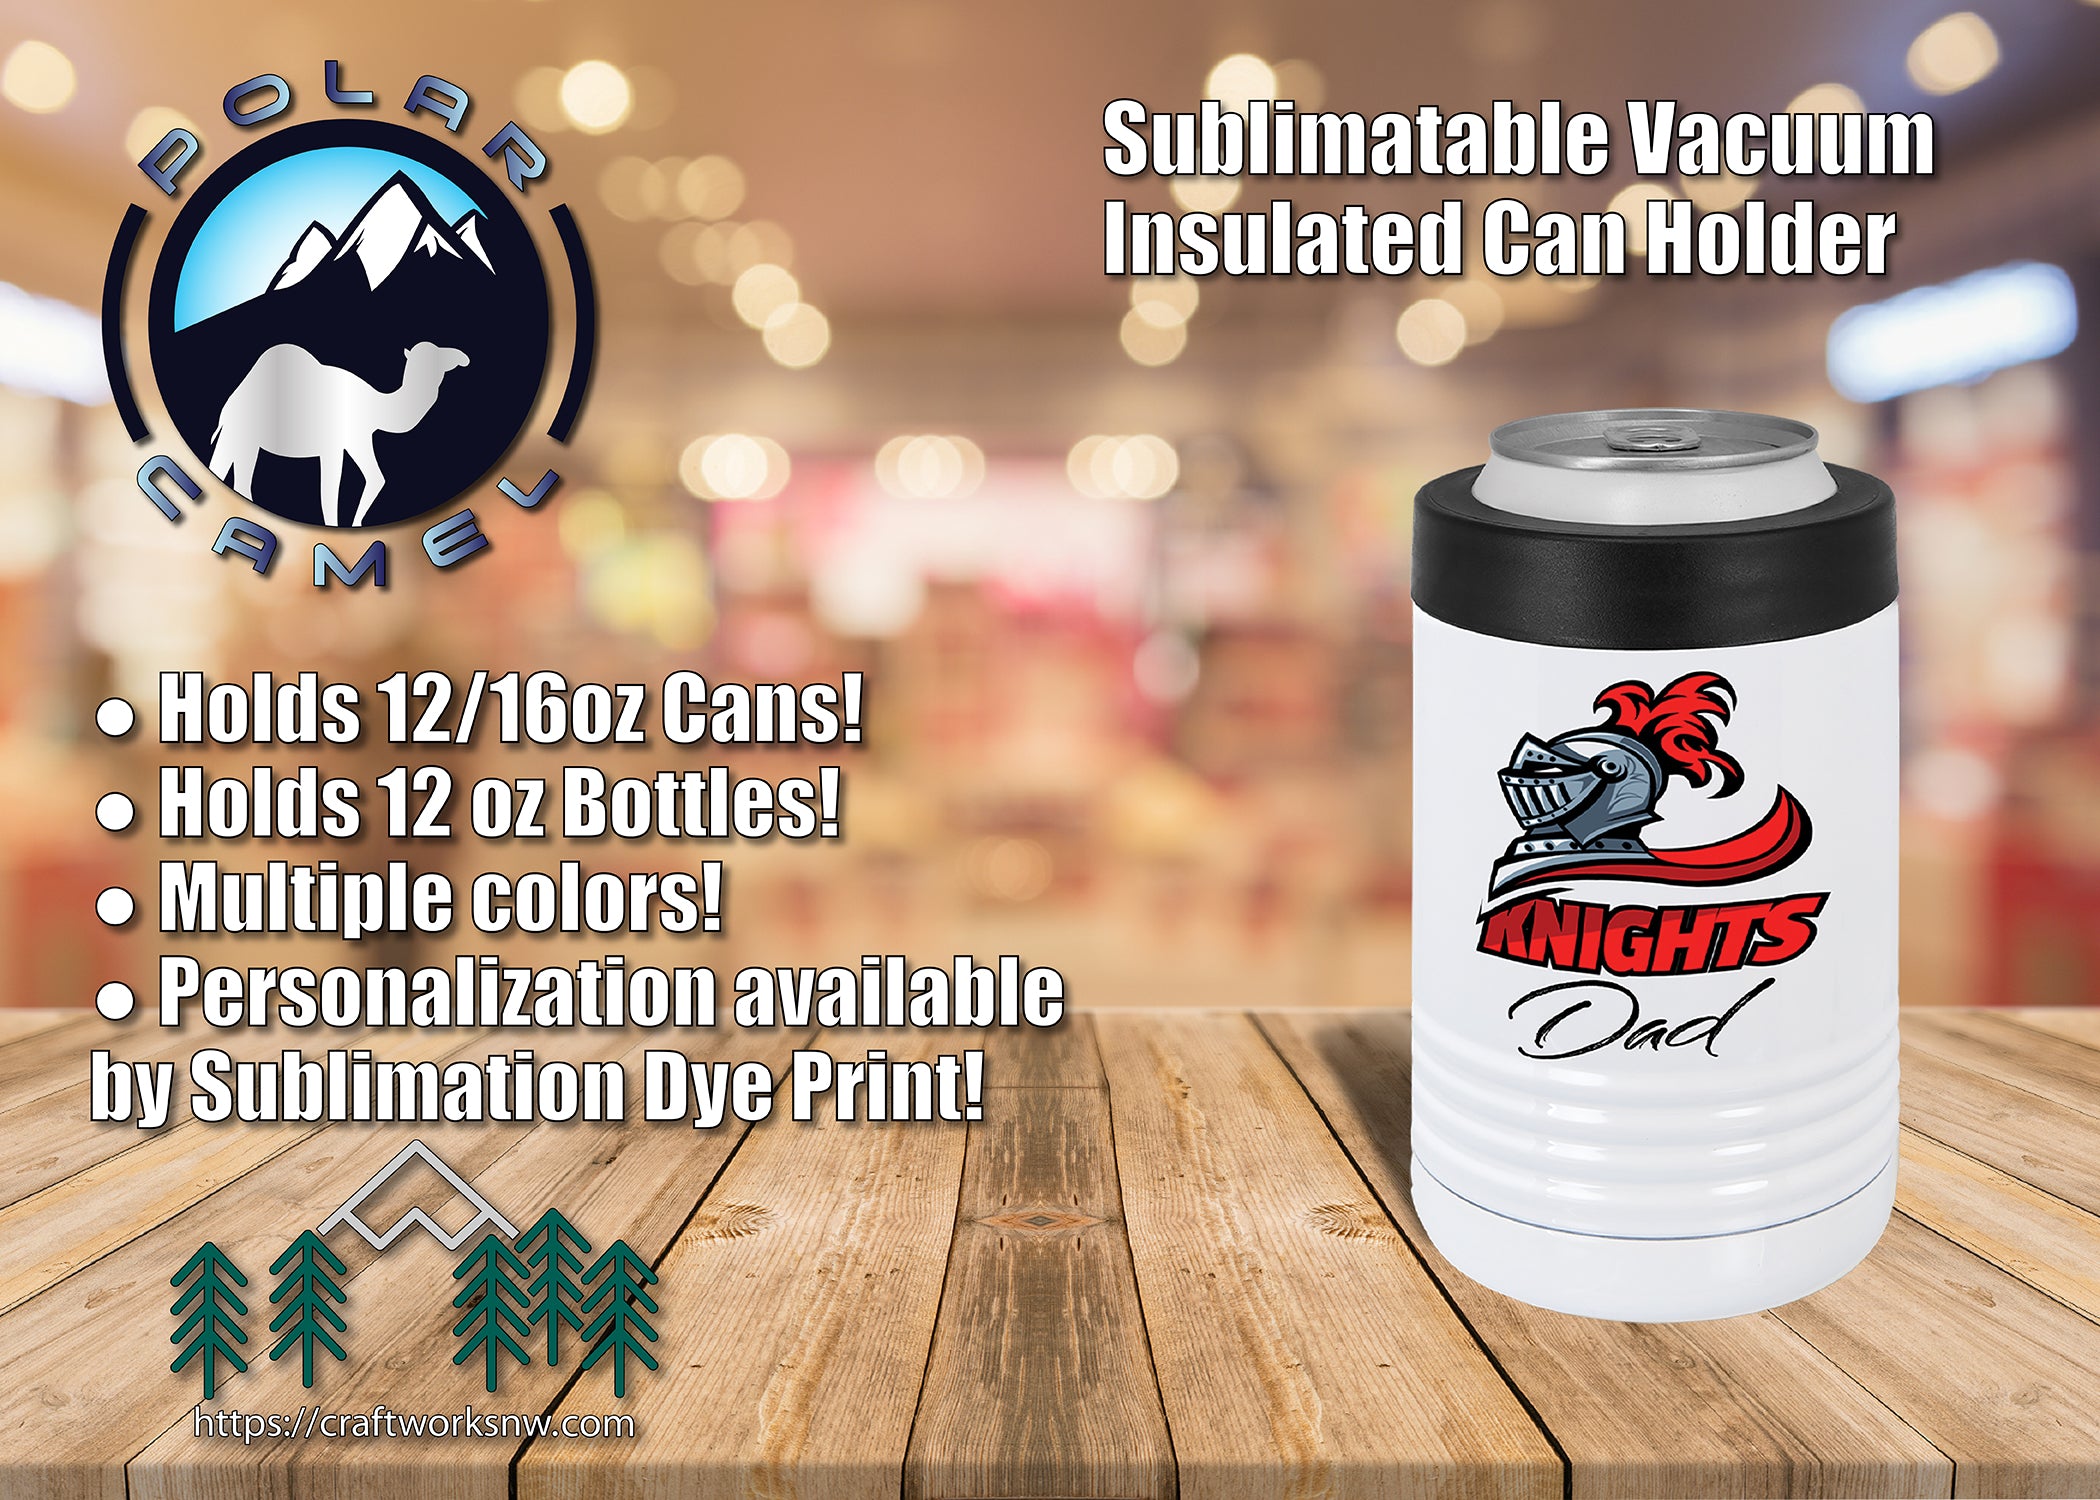 Polar Camel Sublimatable Insulated Beverage/Can Holder, Sublimation Dye Print - Craftworks NW, LLC